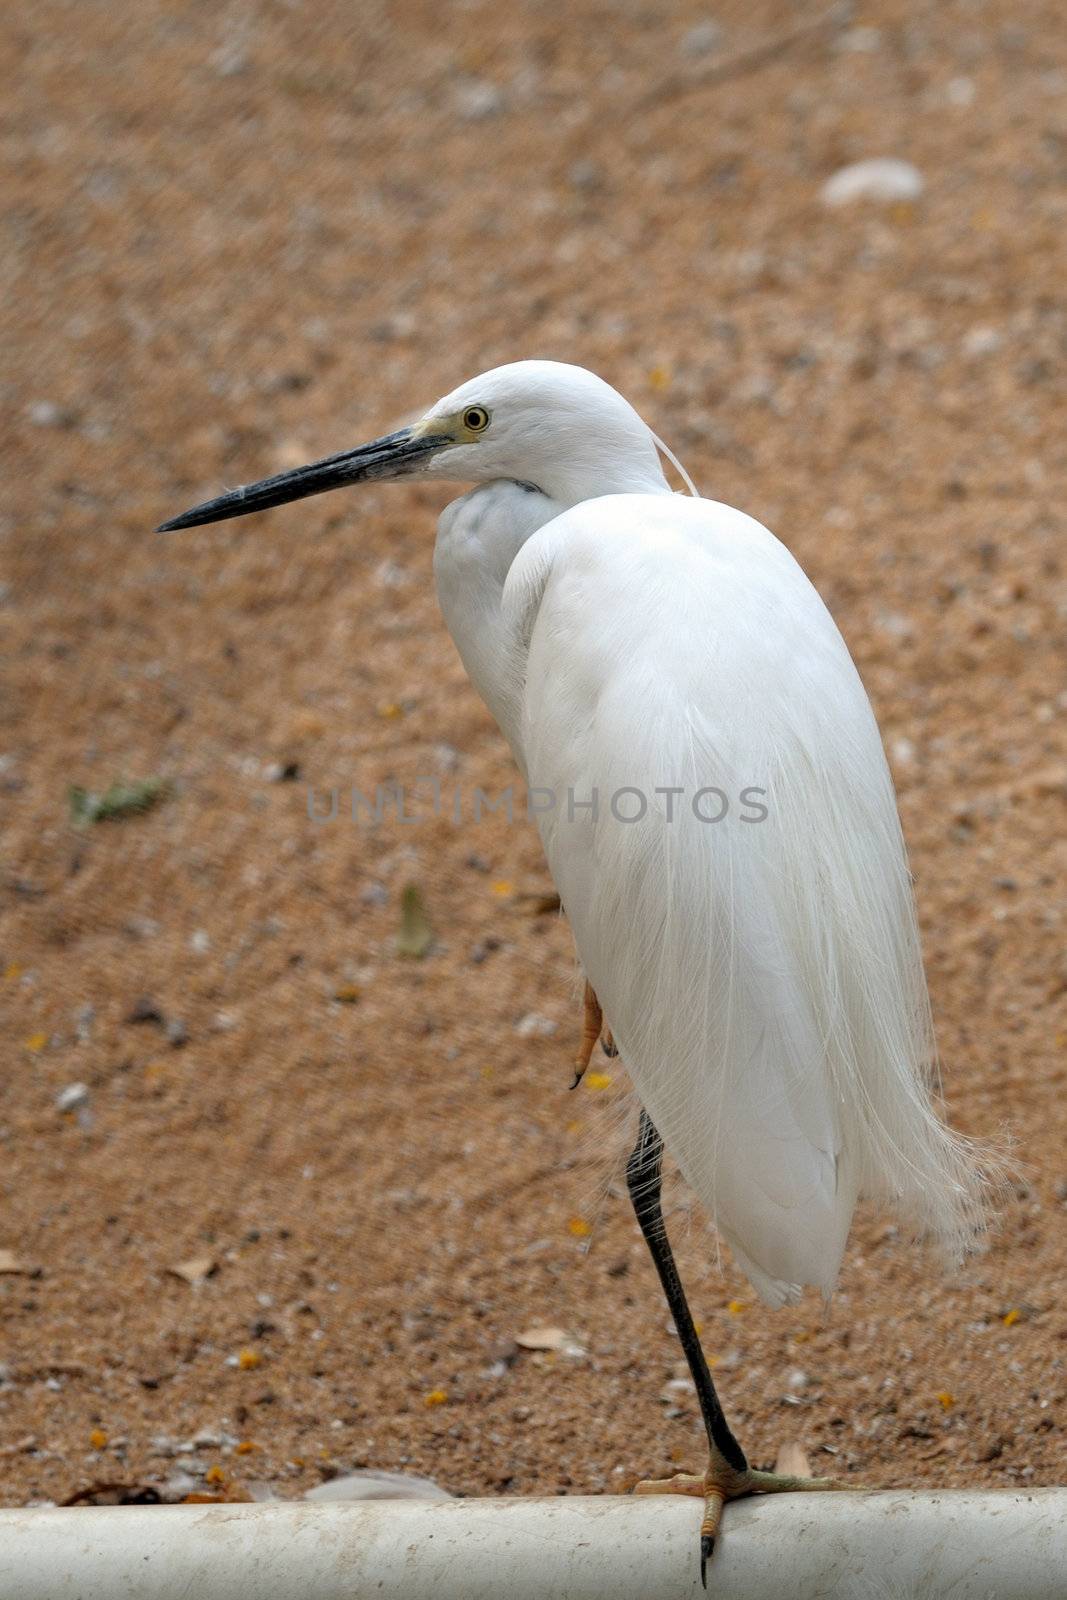 A beautiful cattle egret standing on one leg